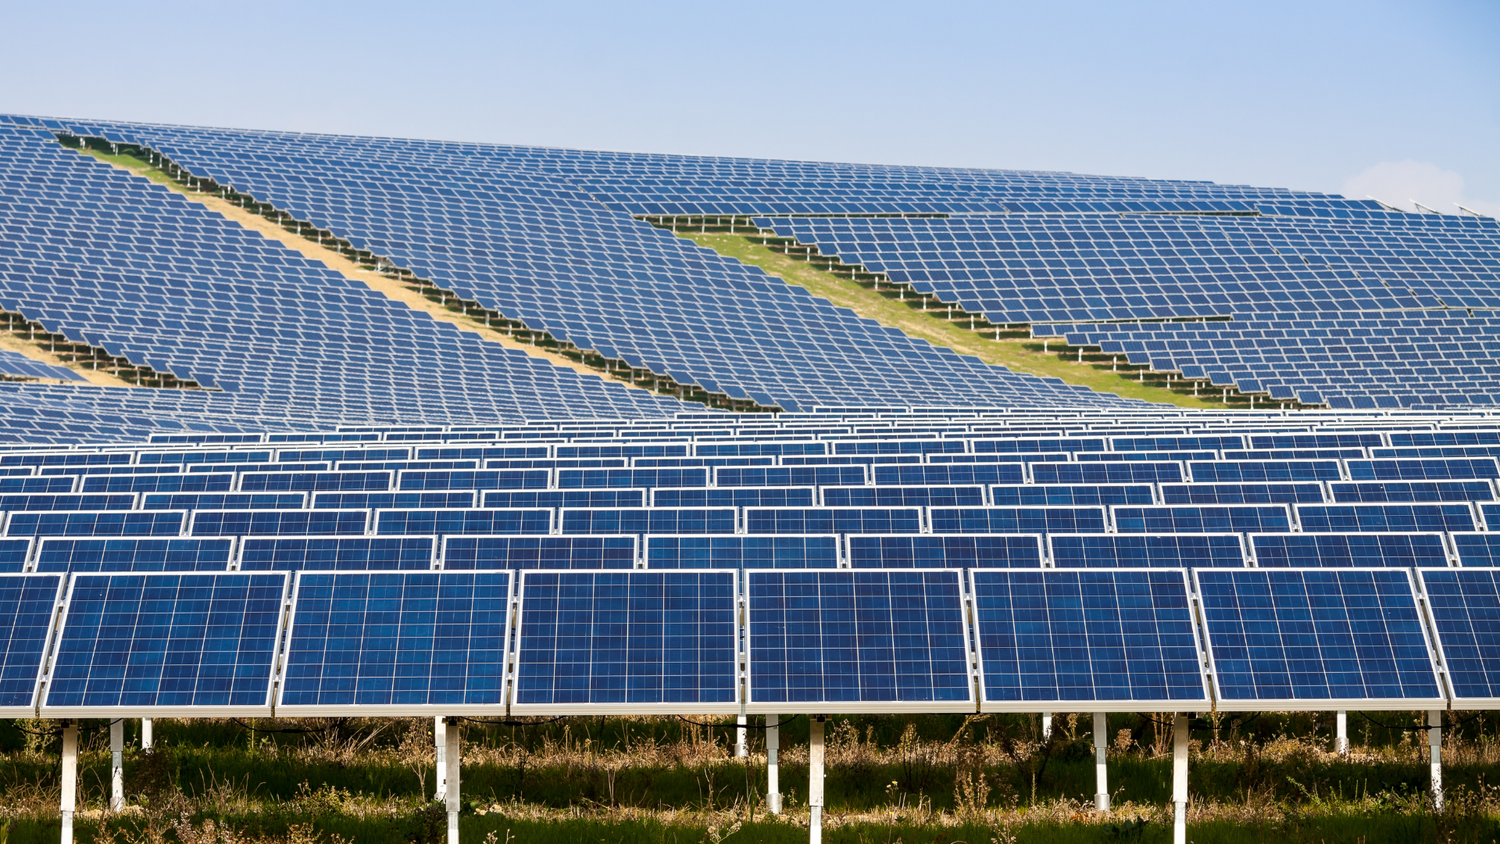 Maximizing solar output requires a system-level approach